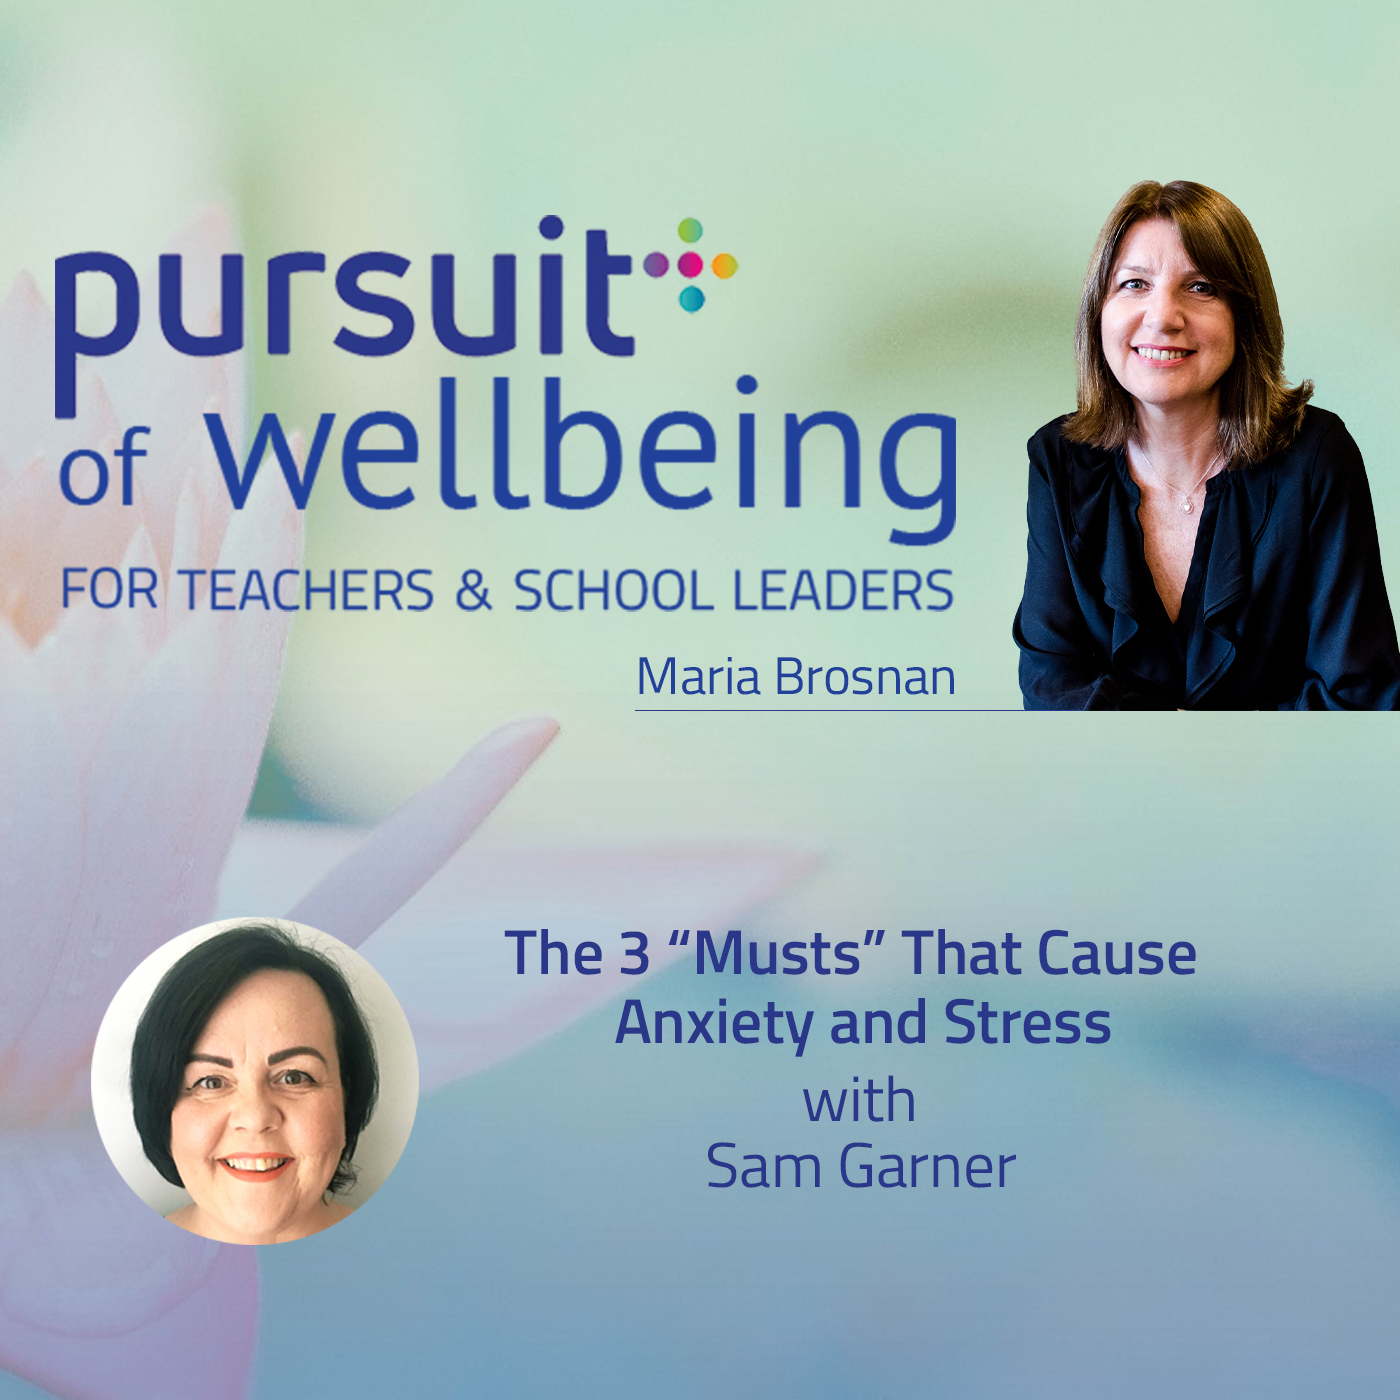 The 3 “Musts” That Cause Anxiety and Stress with Sam Garner